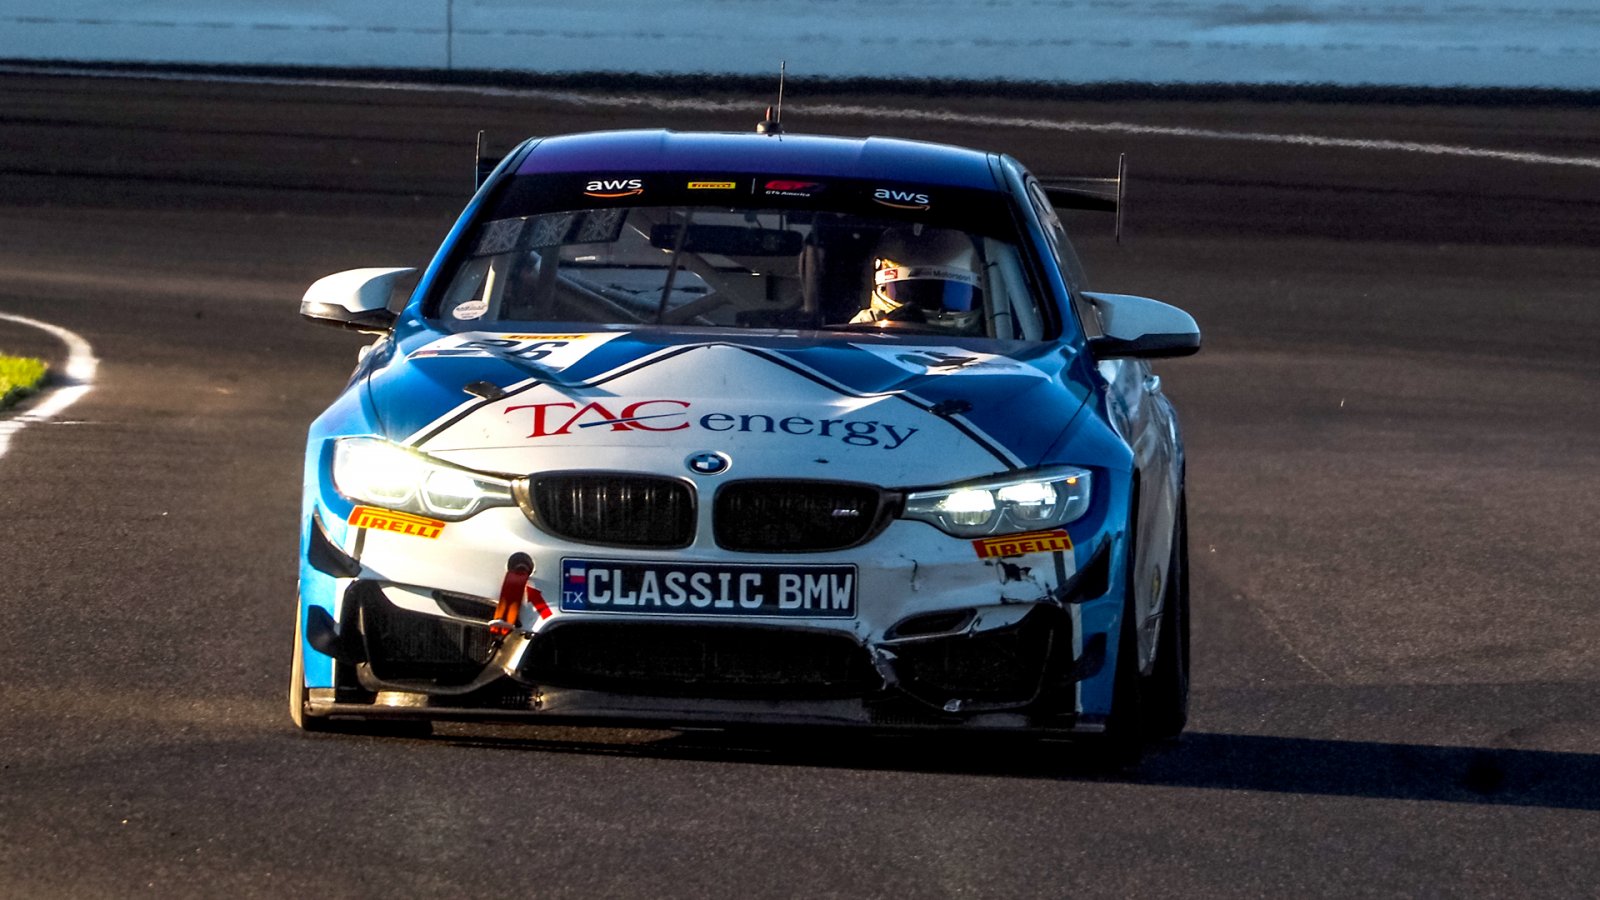 Bloom/Grahovec/McAleer Comeback to Lead in Wild SRO 8-Hour Race Sunday before Retiring at Indianapolis Motor Speedway, Hull/Grahovec Duo Takes 6th in GT4 SprintX Silver Event